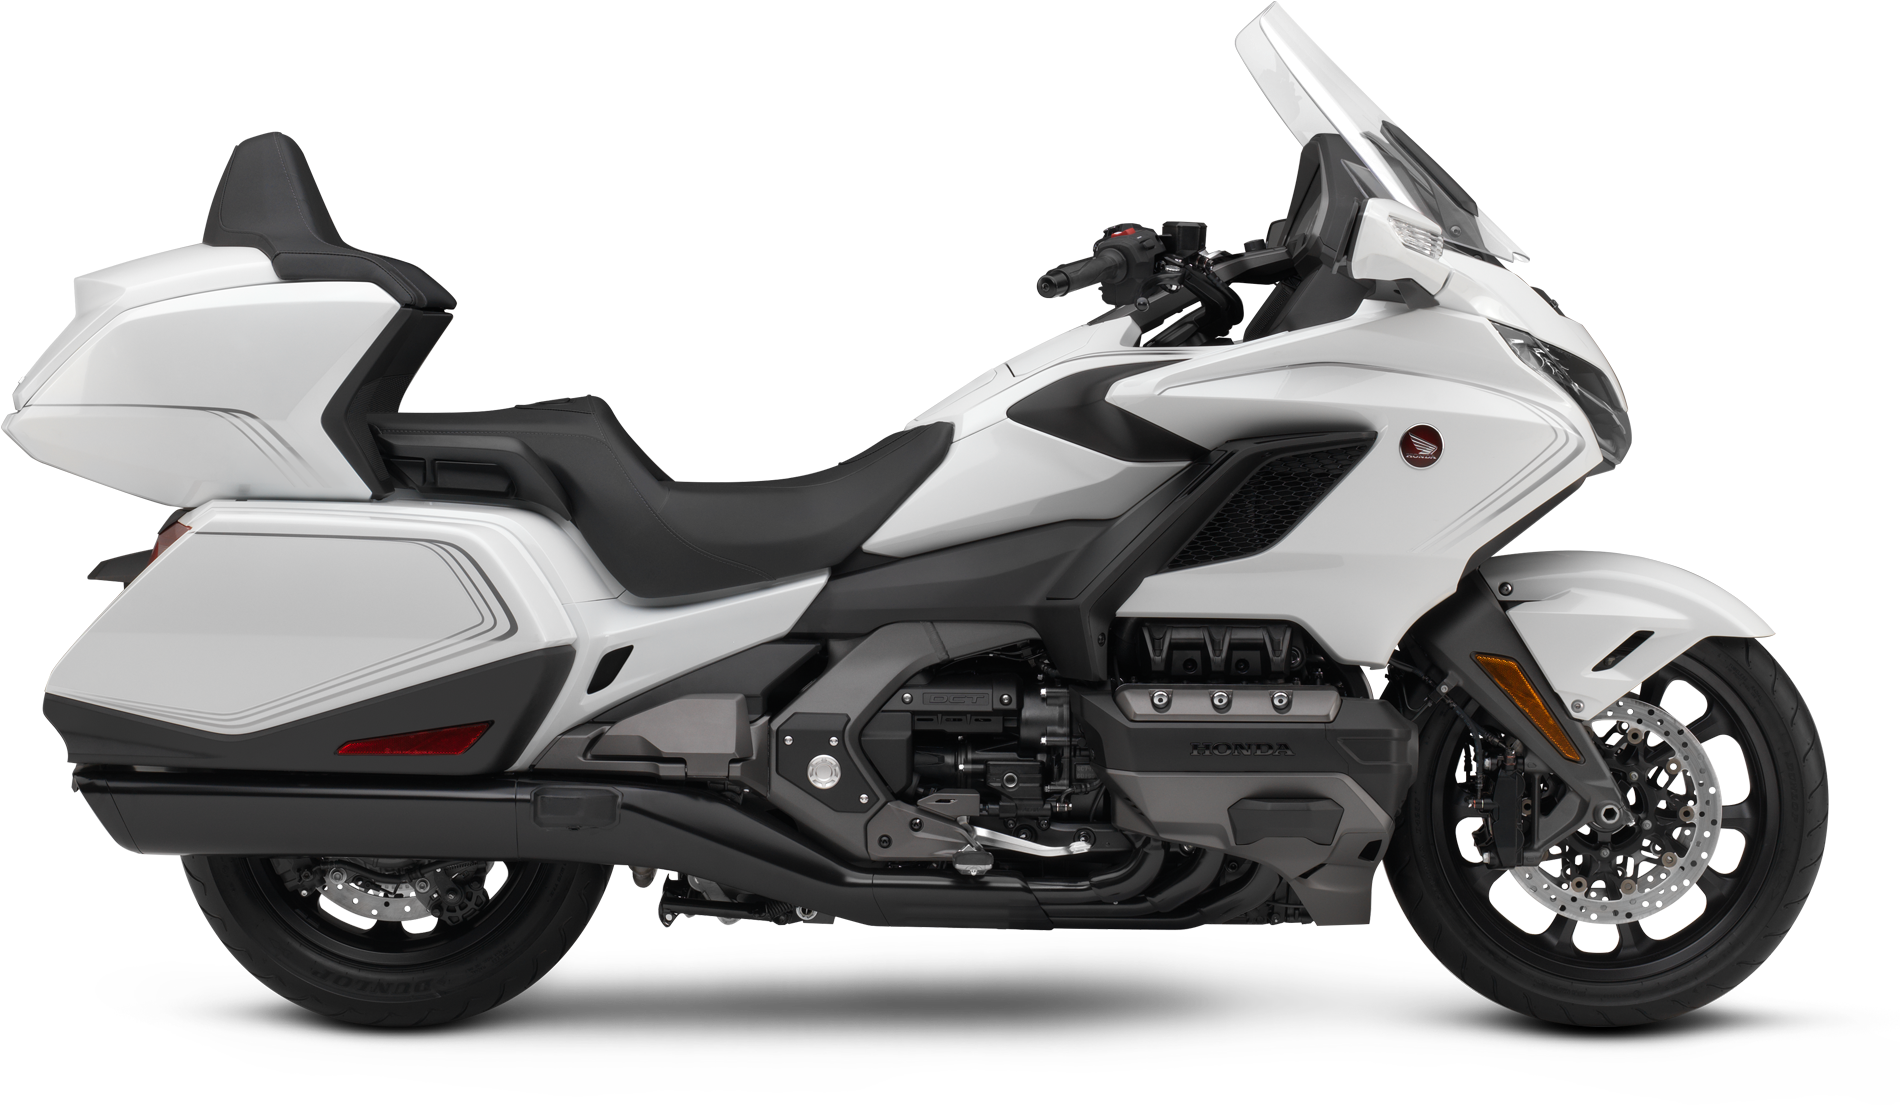 A White And Black Motorcycle